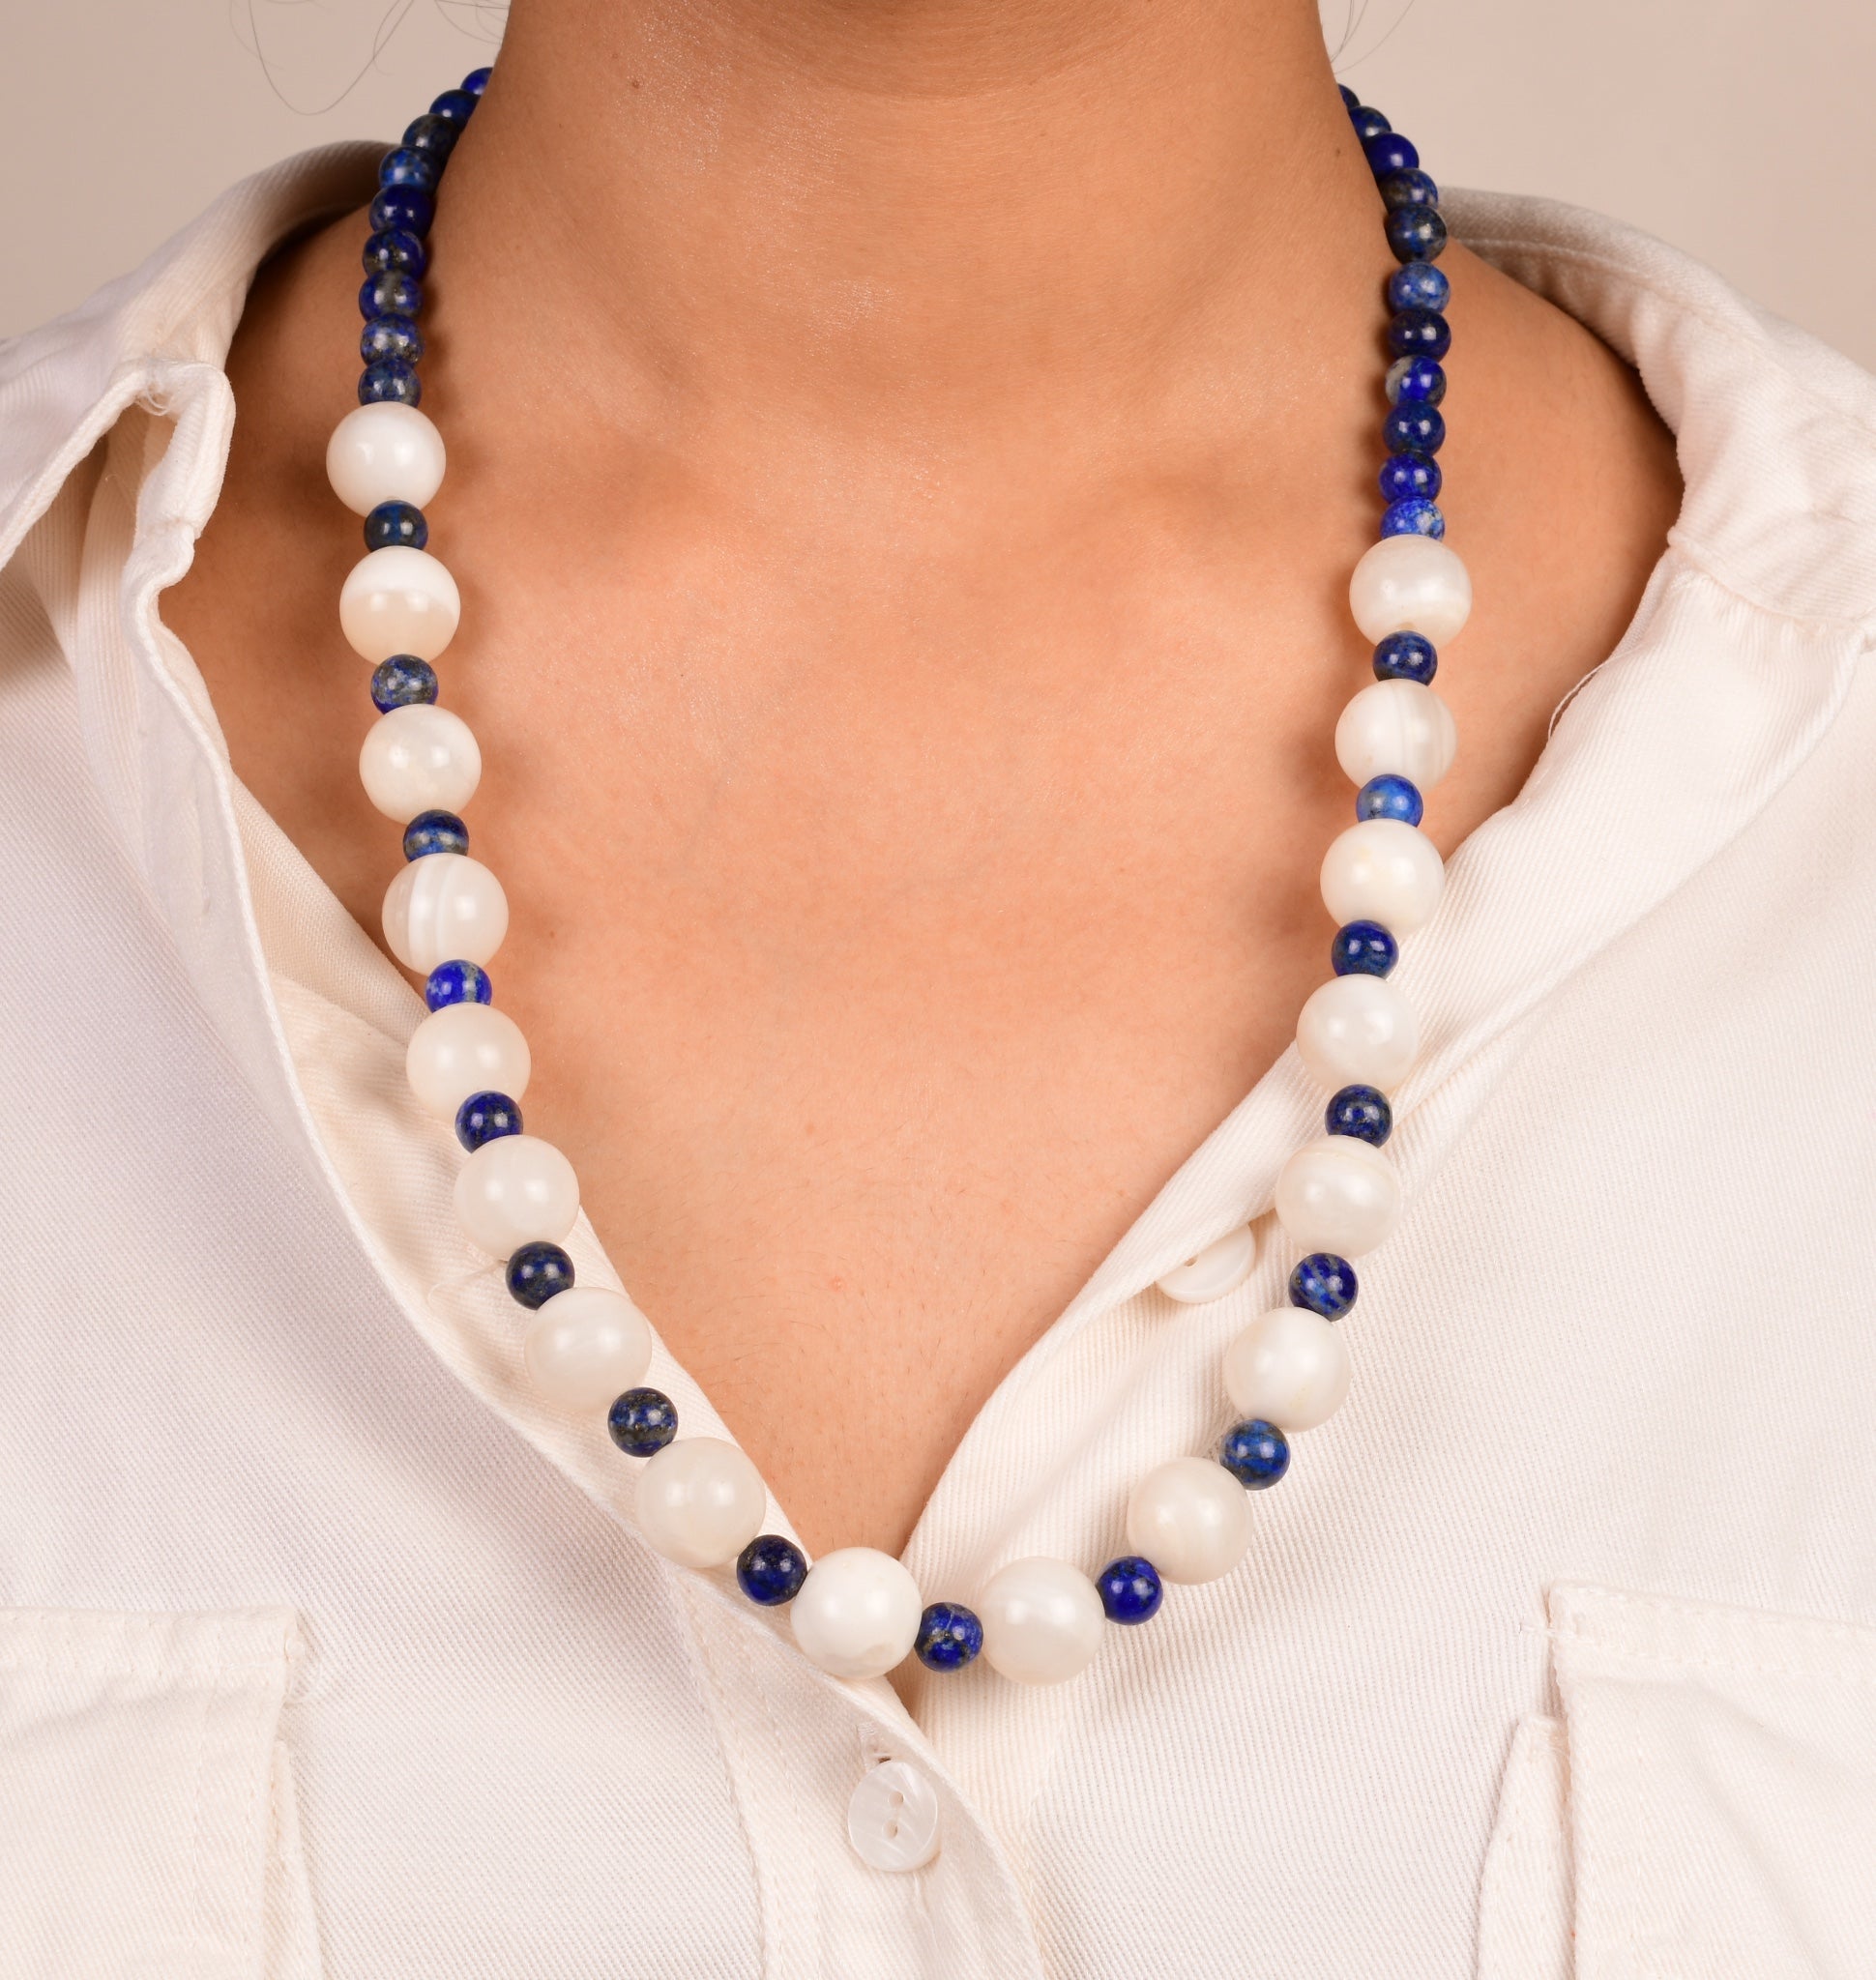 Lapis Lazuli & Agate Necklace - Bodh Gem and Crystals